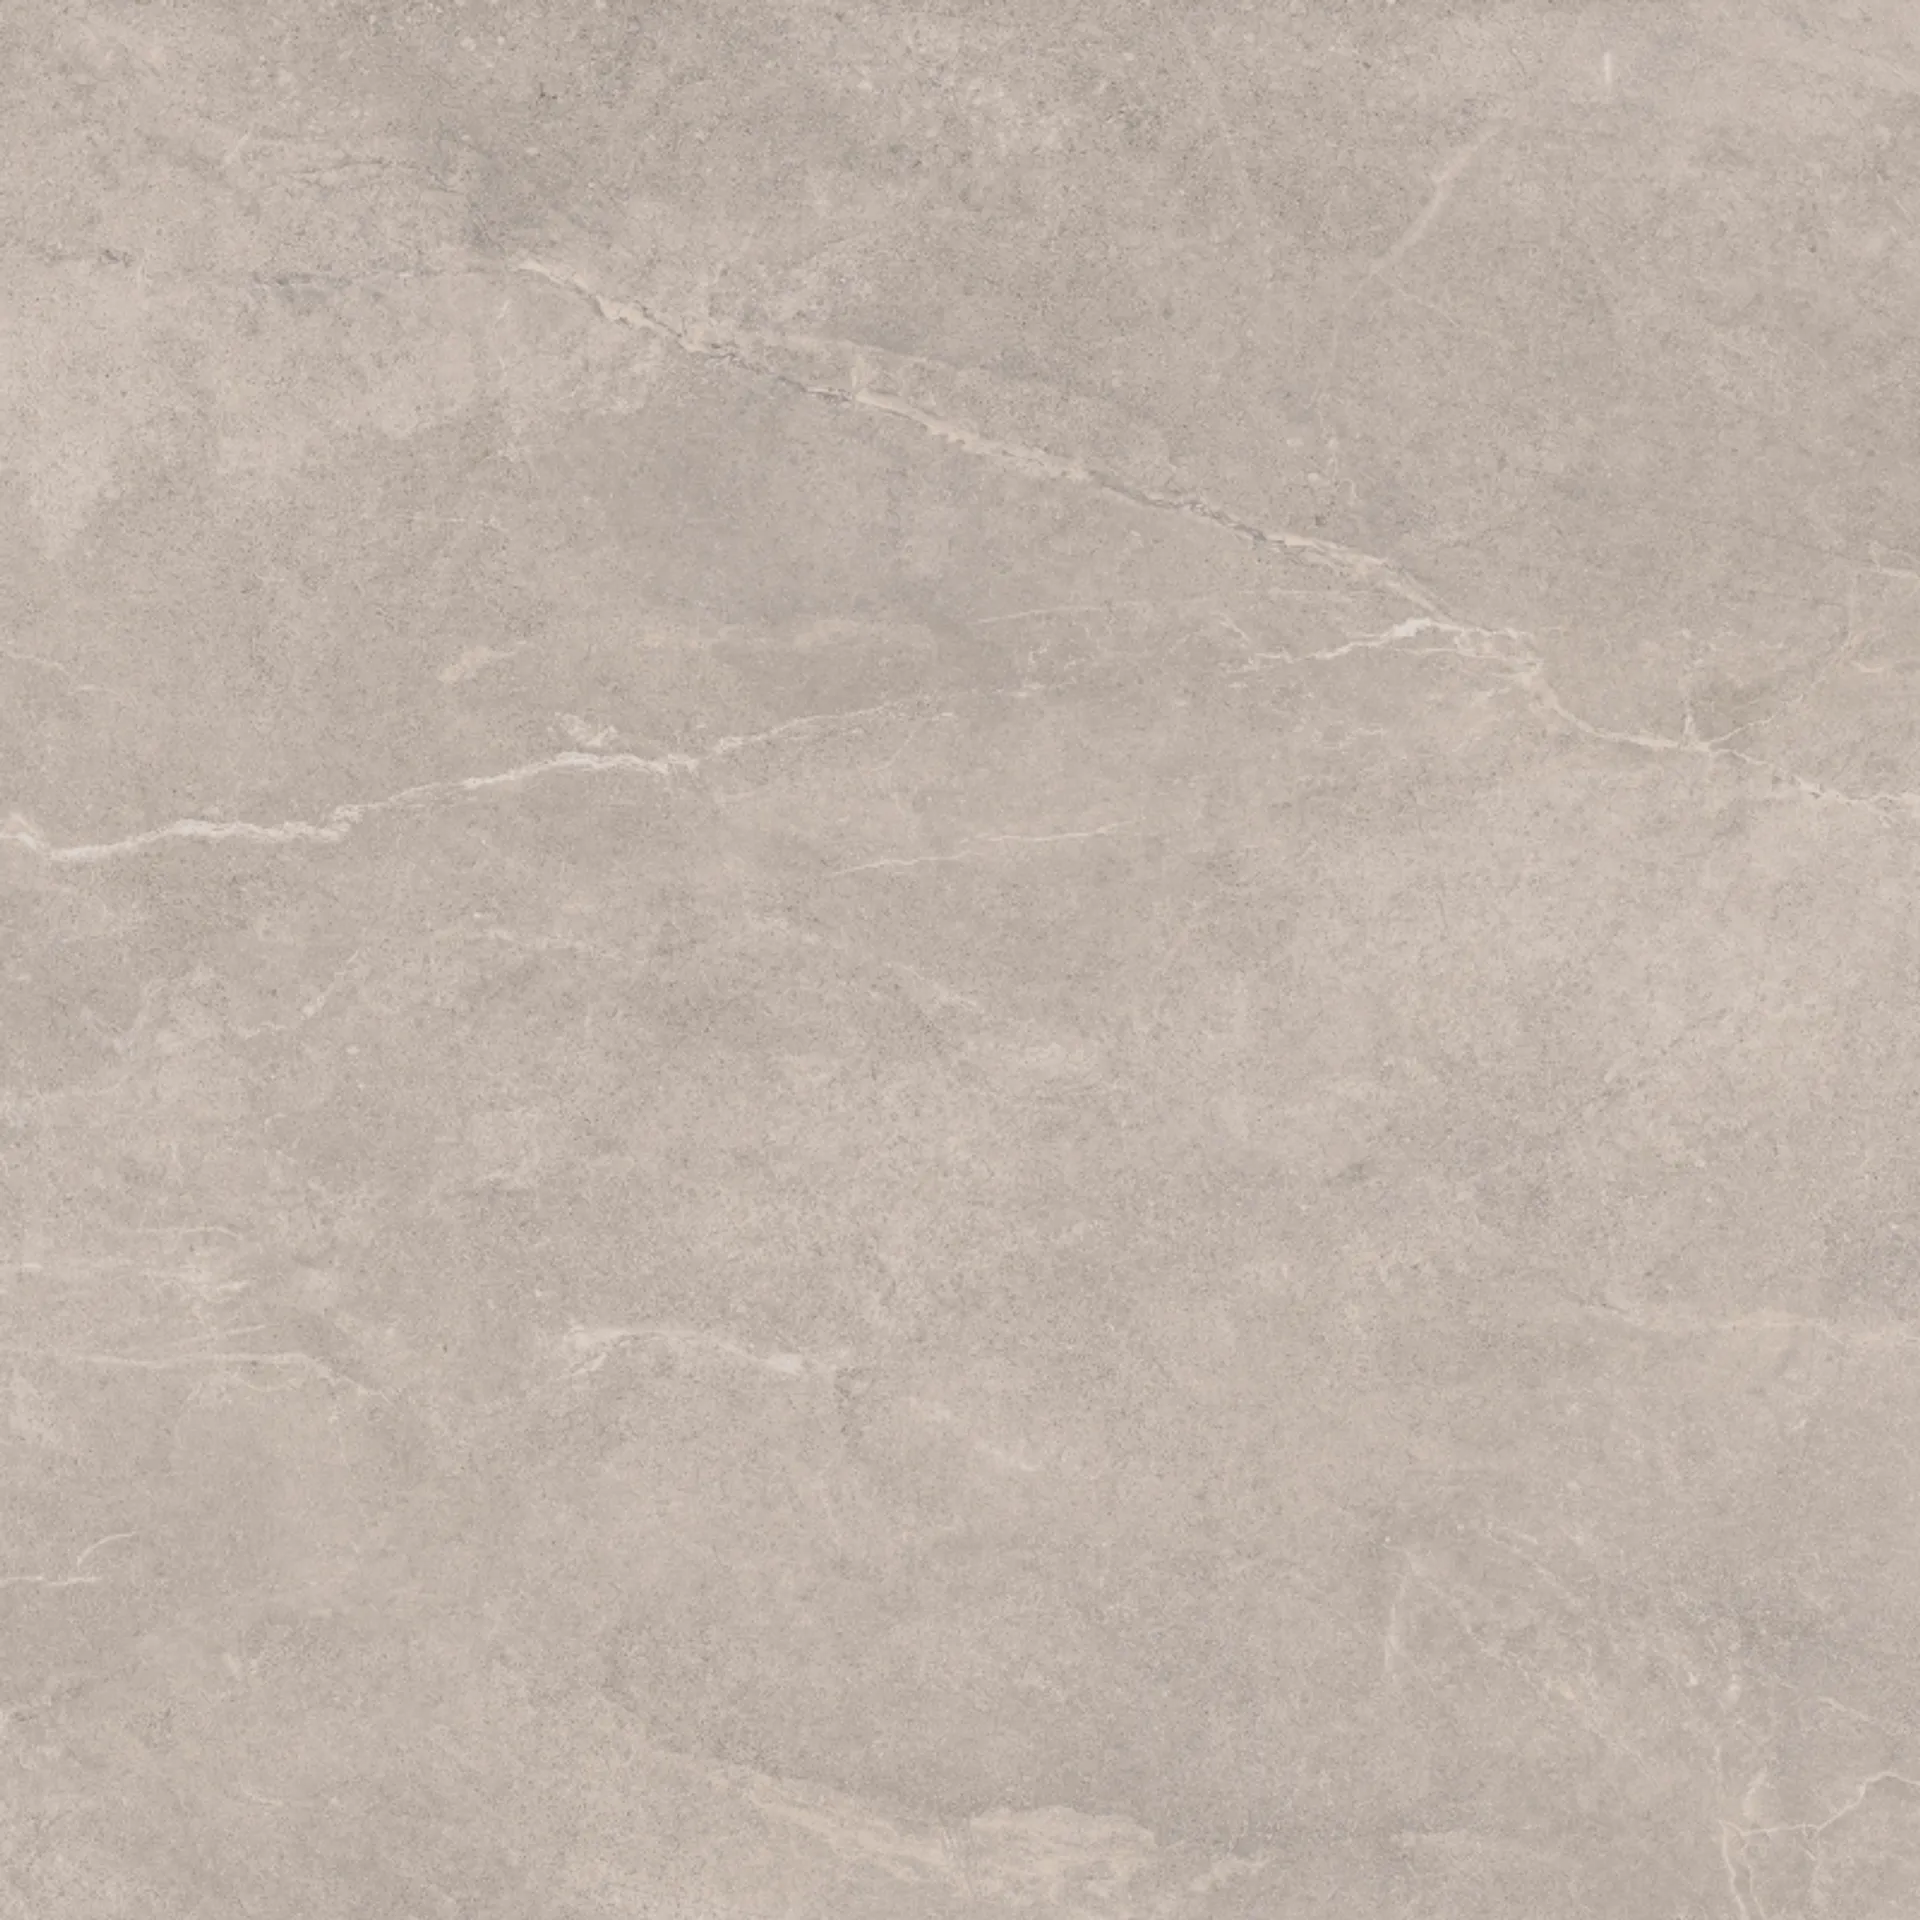 Gres Pure Stone light grey mat rectified 59,5x59,5 Cersanit